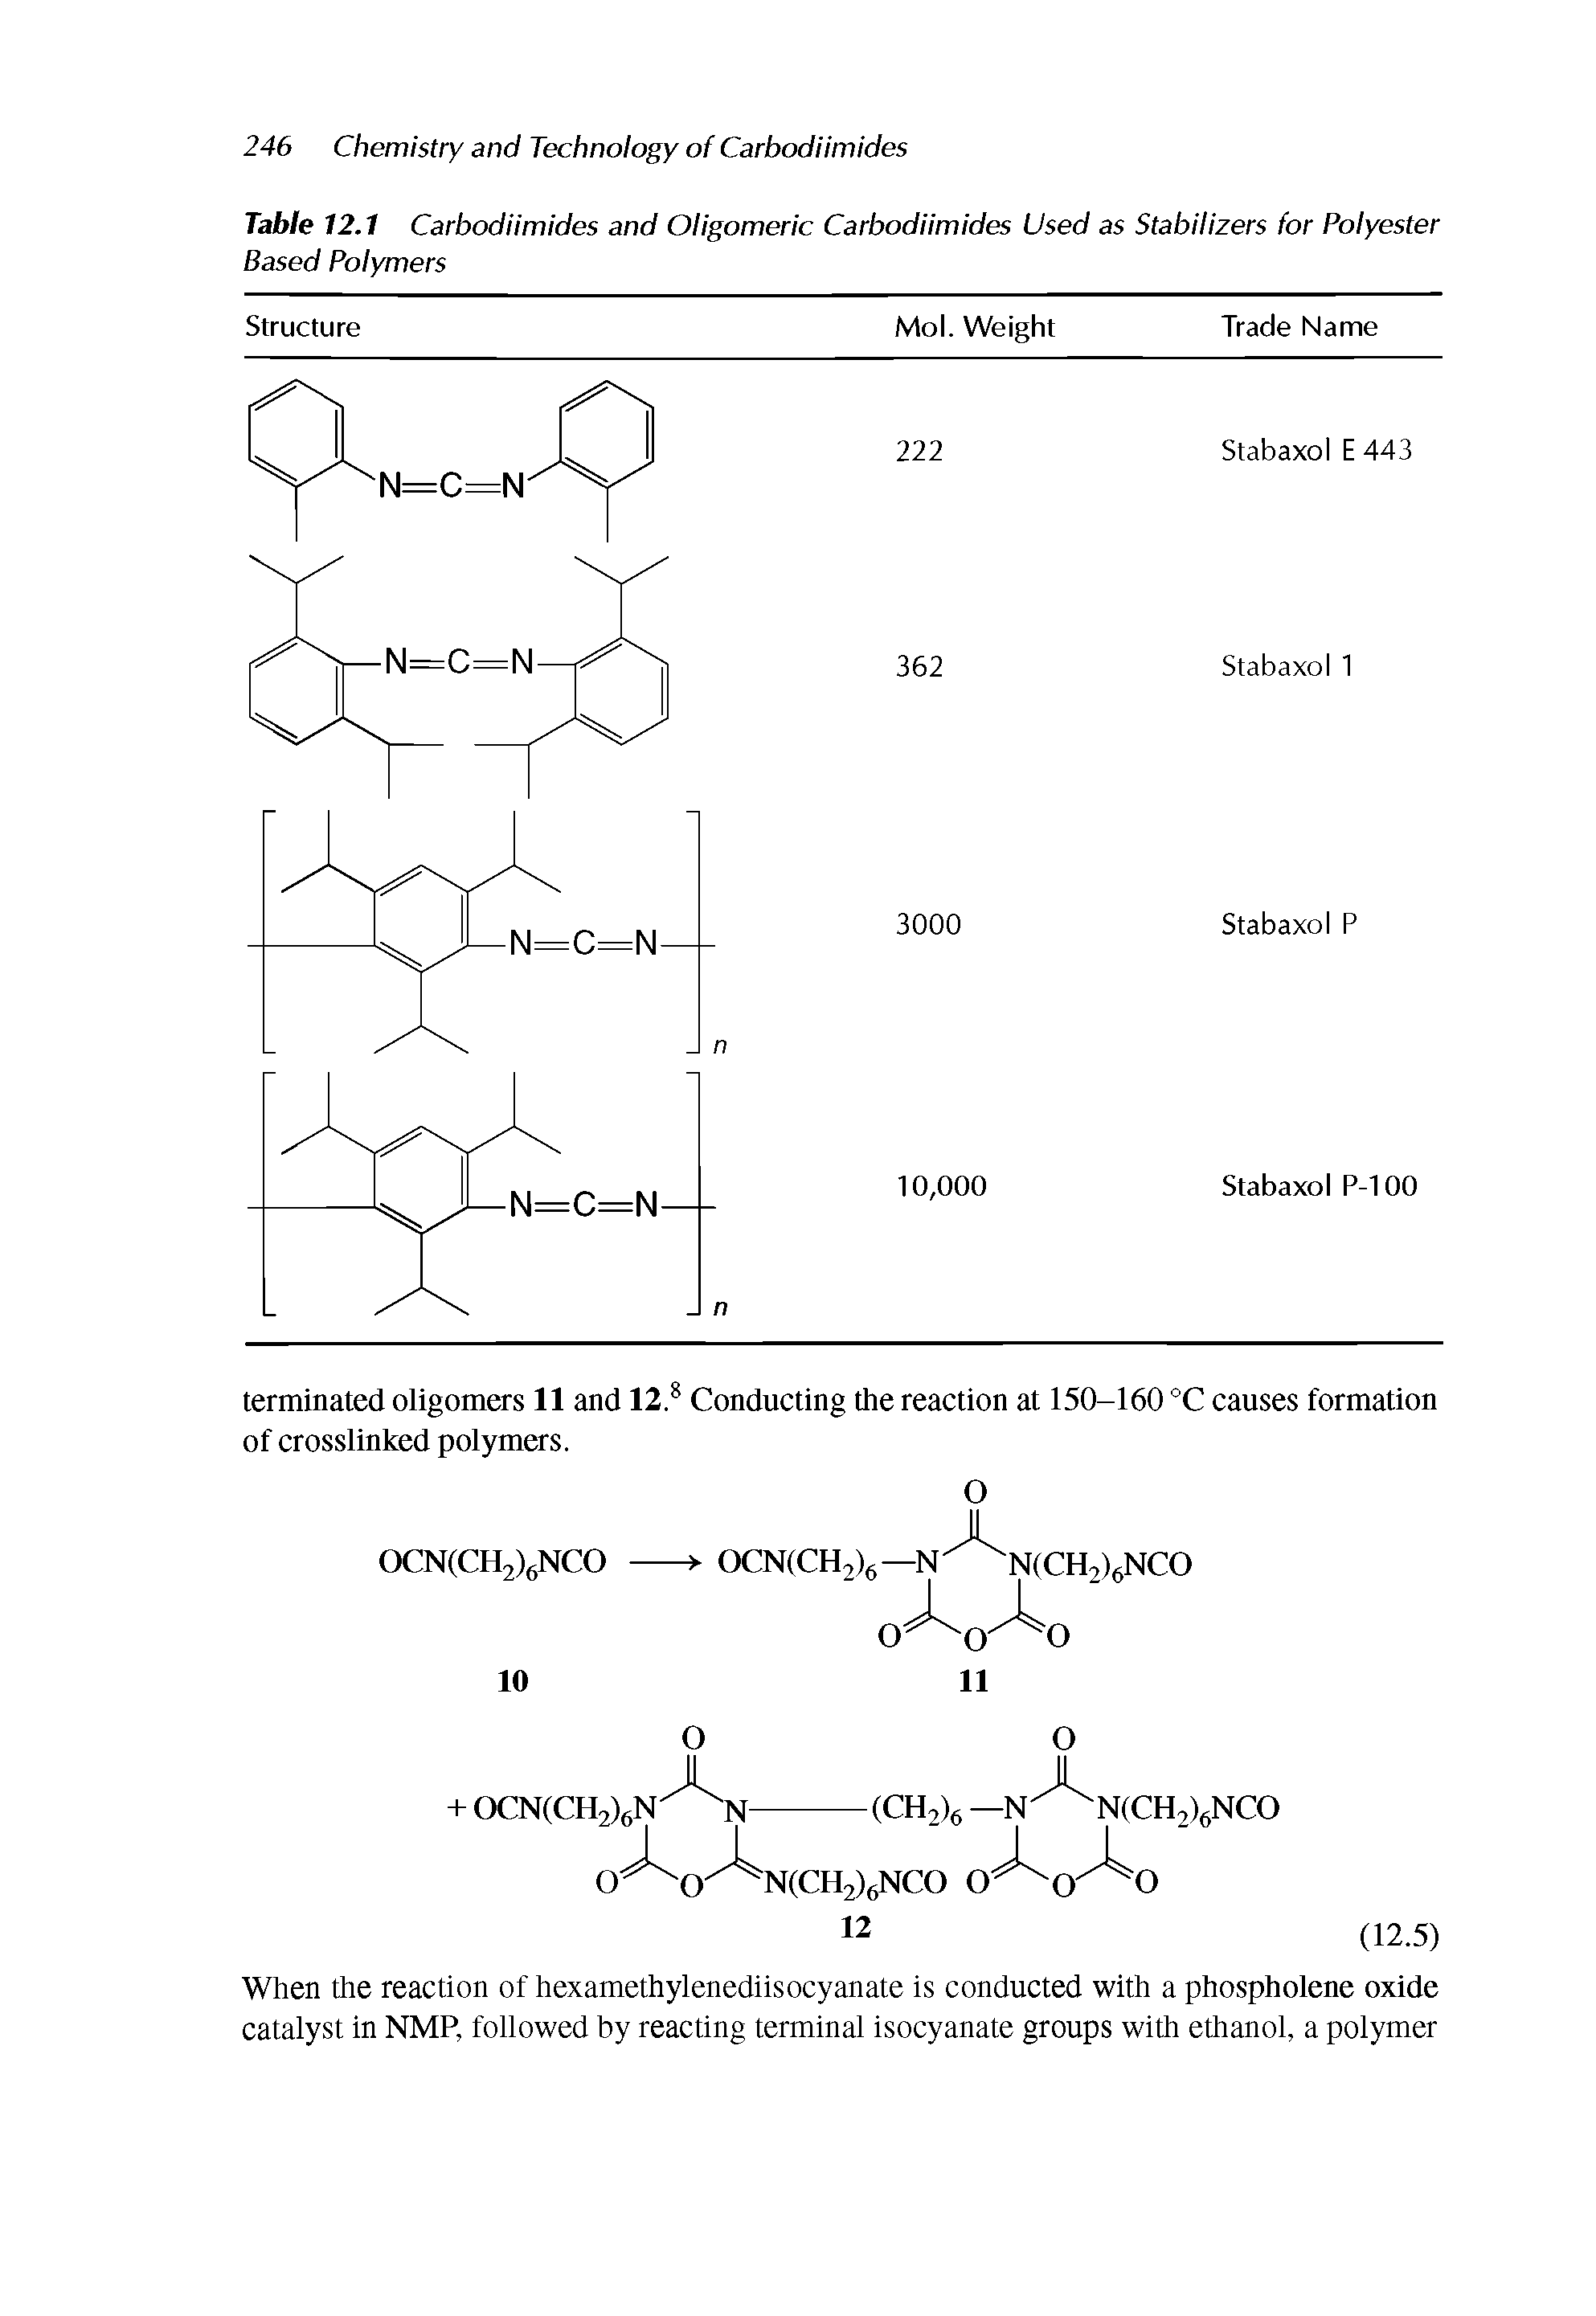 Table 12.1 Carbodiimides and Oligomeric Carbodiimides Used as Stabilizers for Polyester Based Polymers...